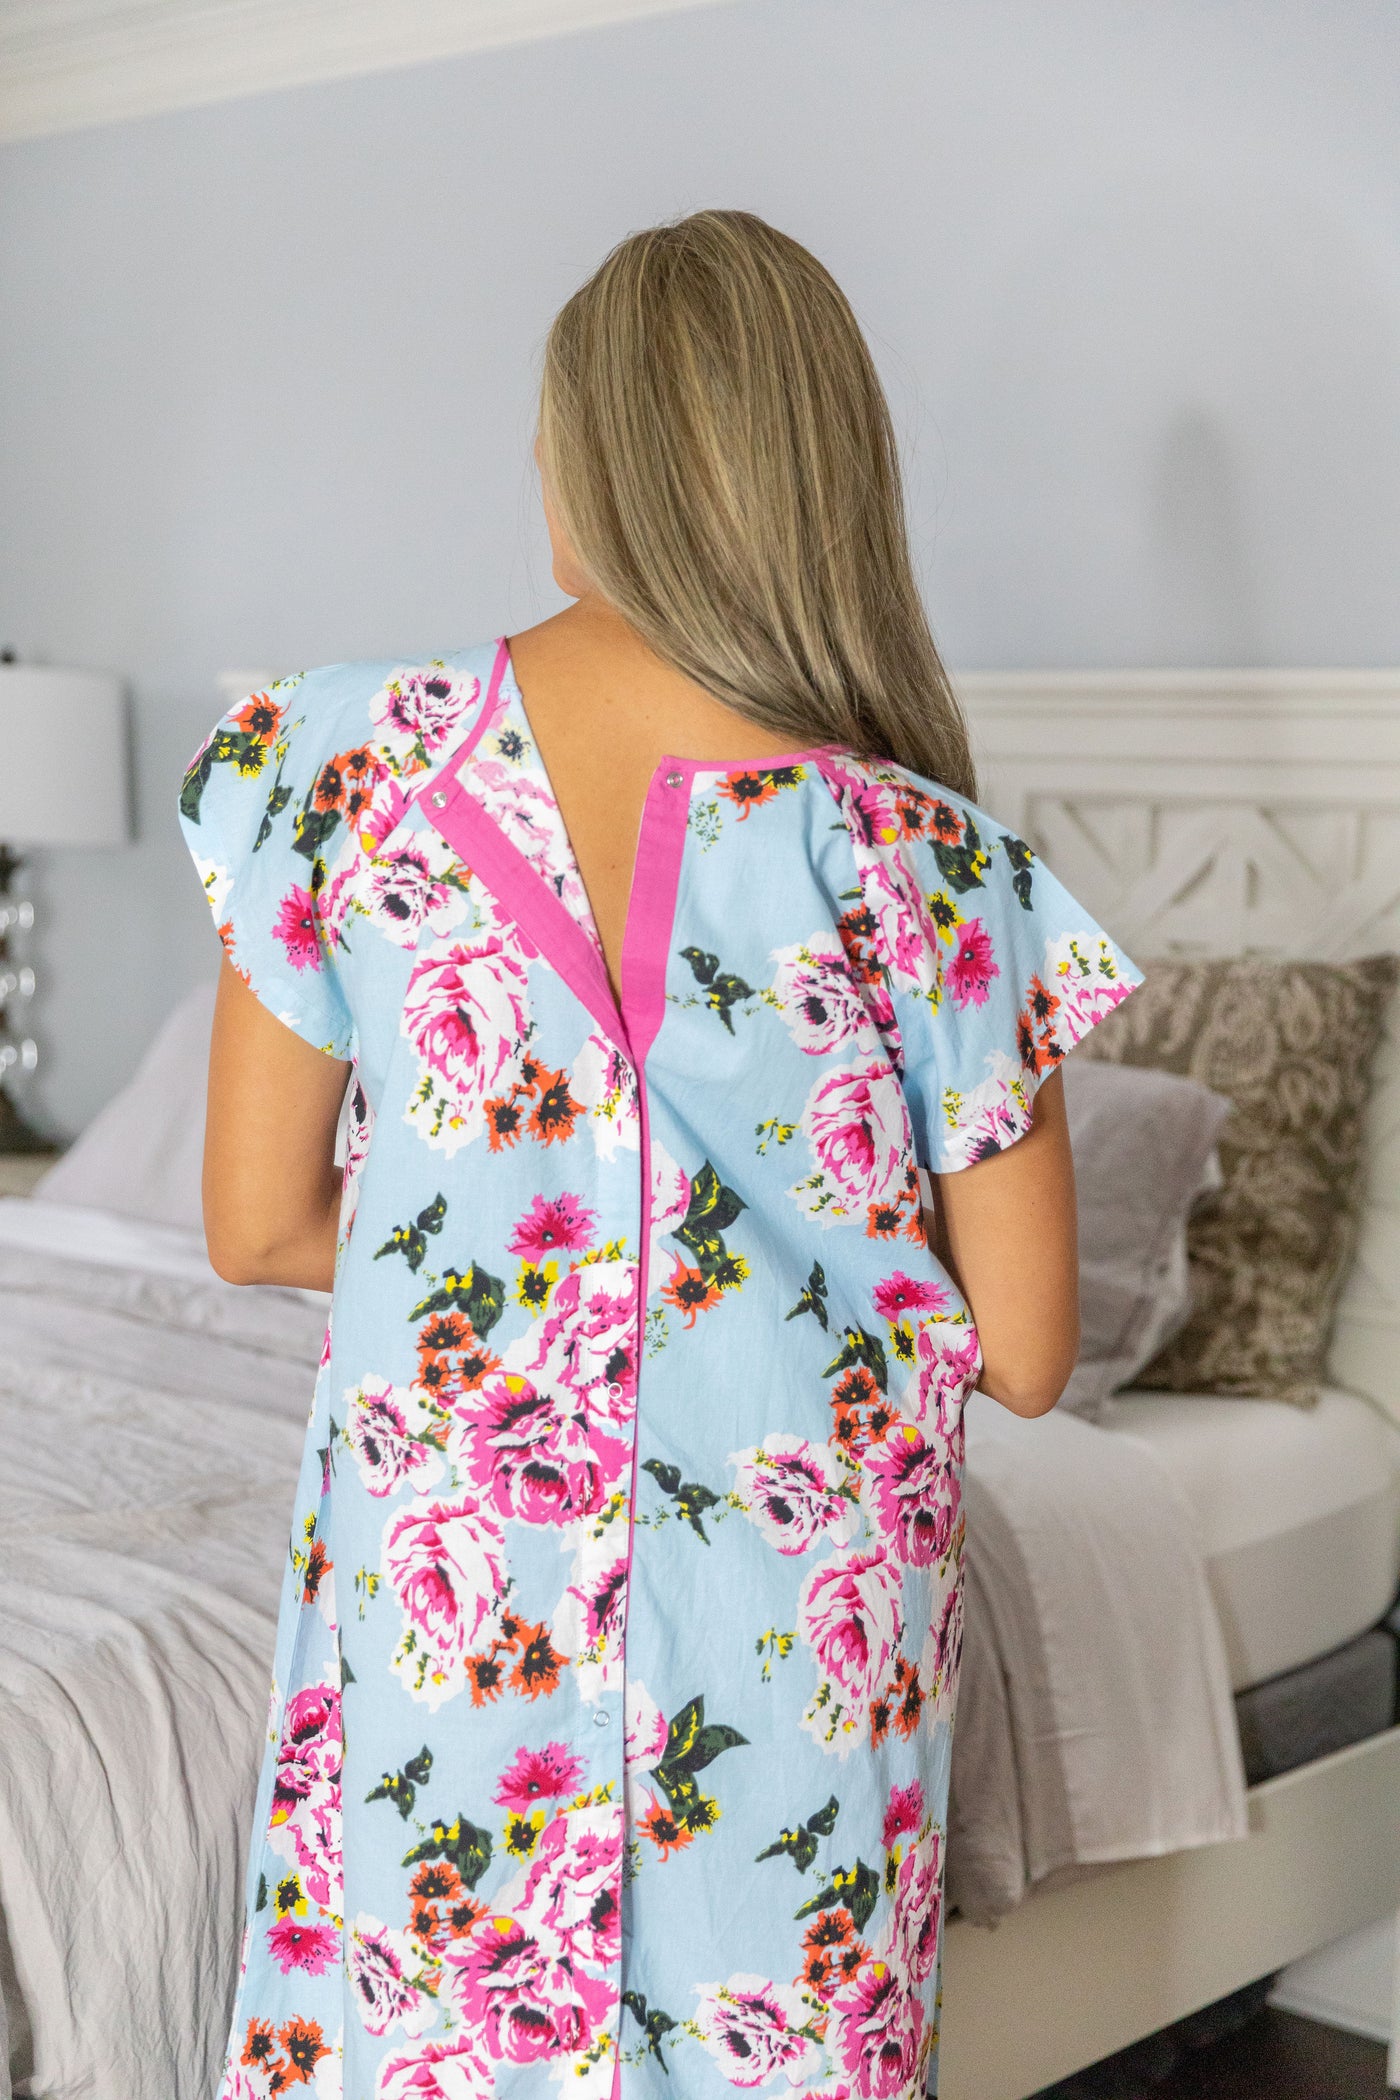 Isla Patient Hospital Gown Gownies